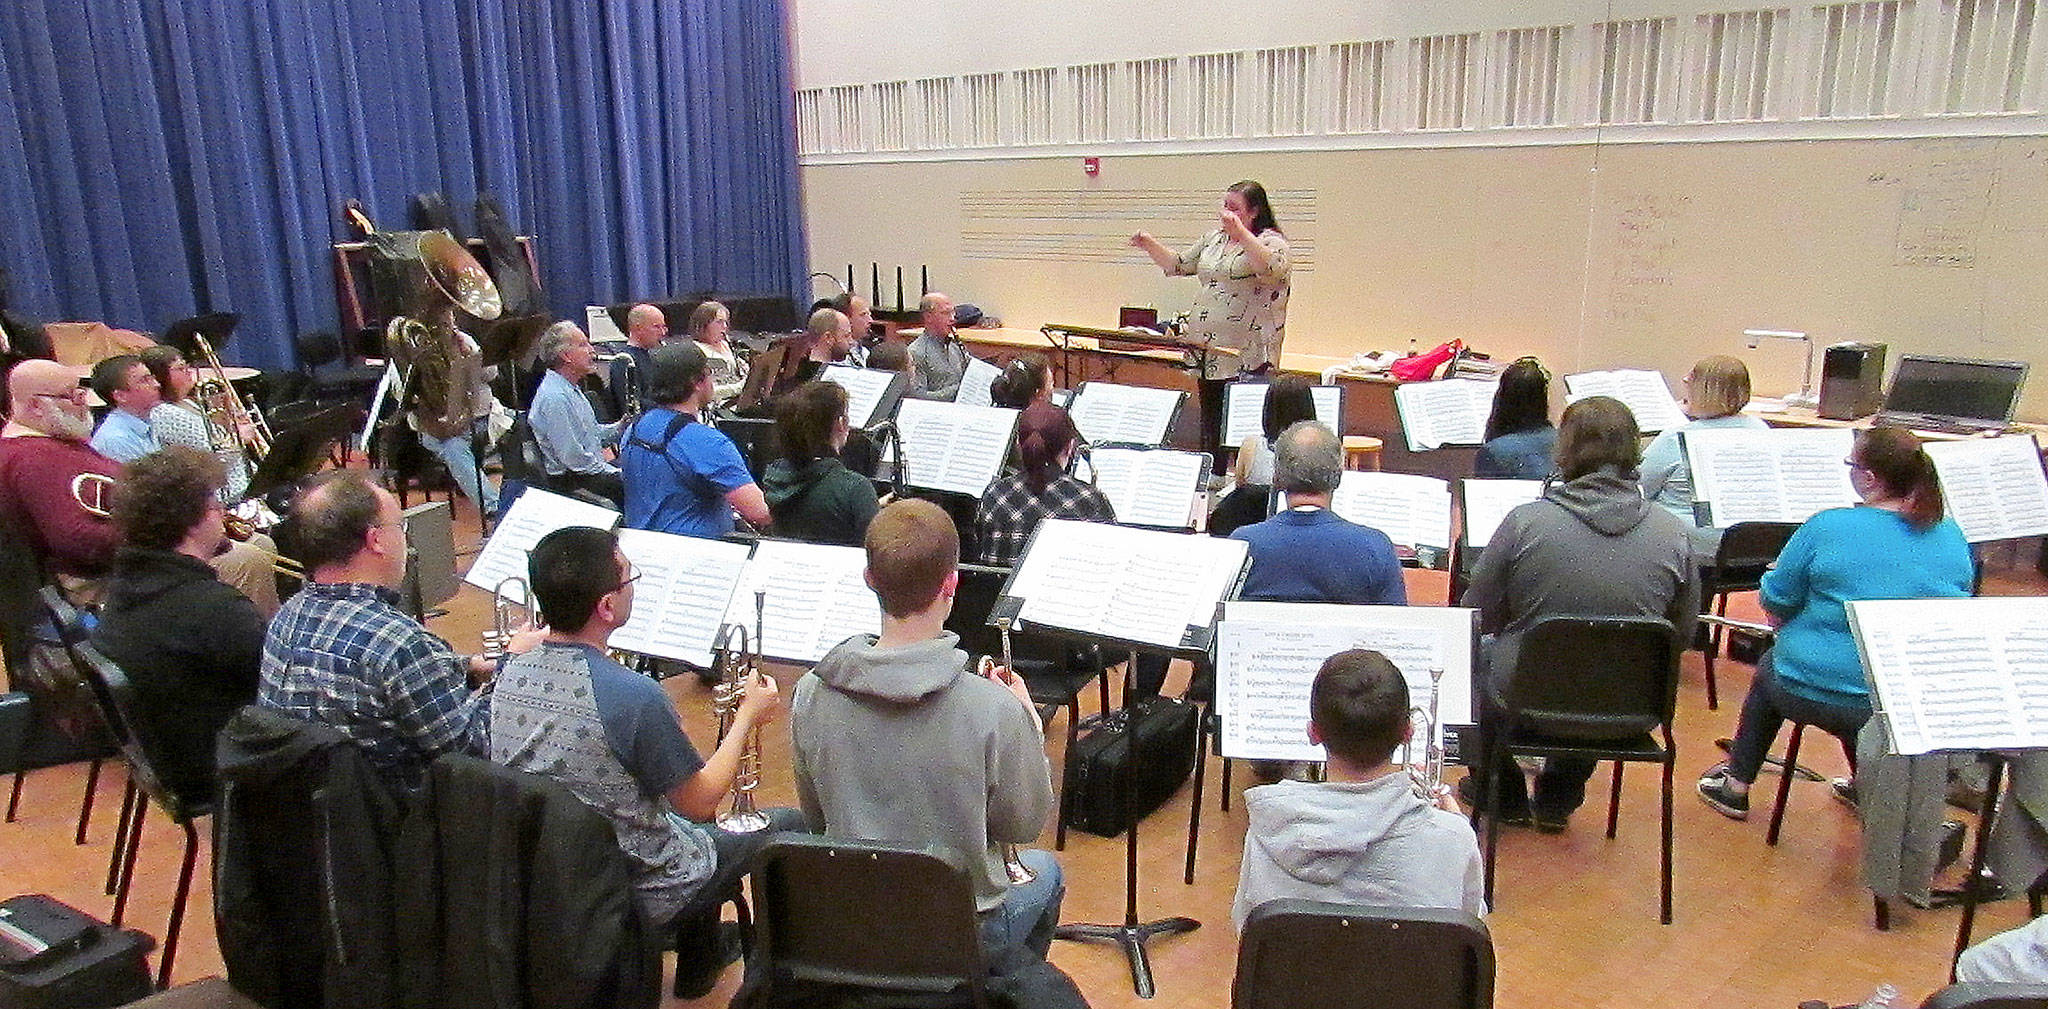 Tiffany Maki conducts a rehearsal of the new Grays Harbor Community Concert Band. (Photo by Scott D. Johnston)